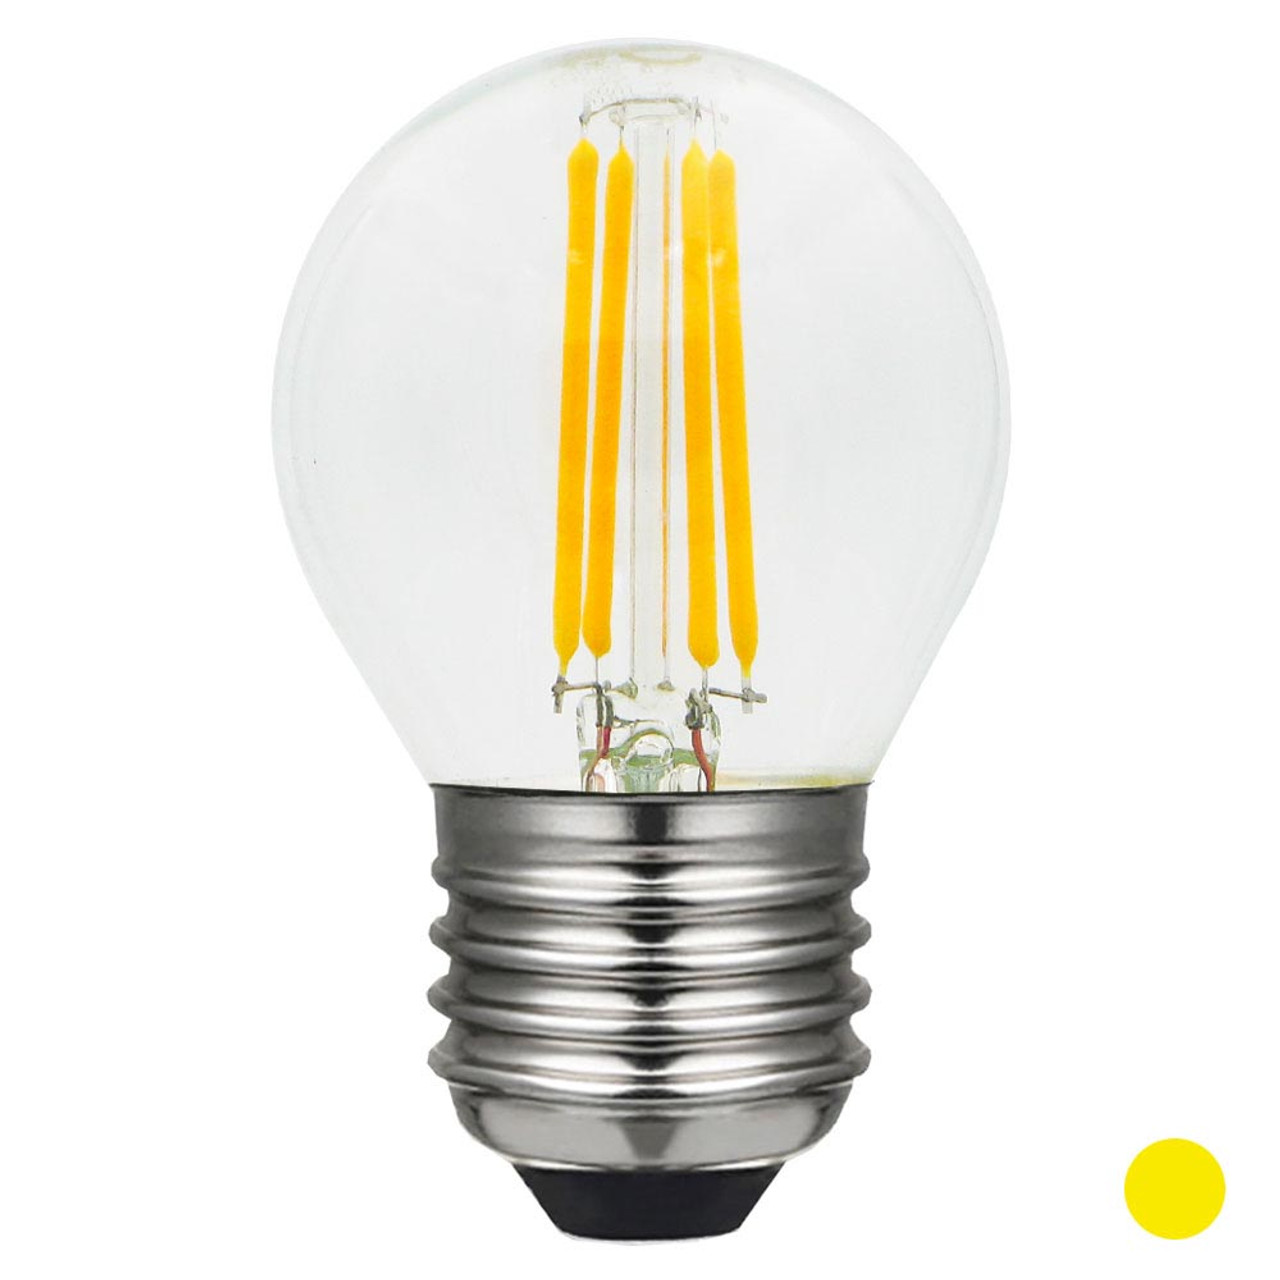 LED Filament Round 45mm ES 4W 220-240V Yellow Dimmable Laes